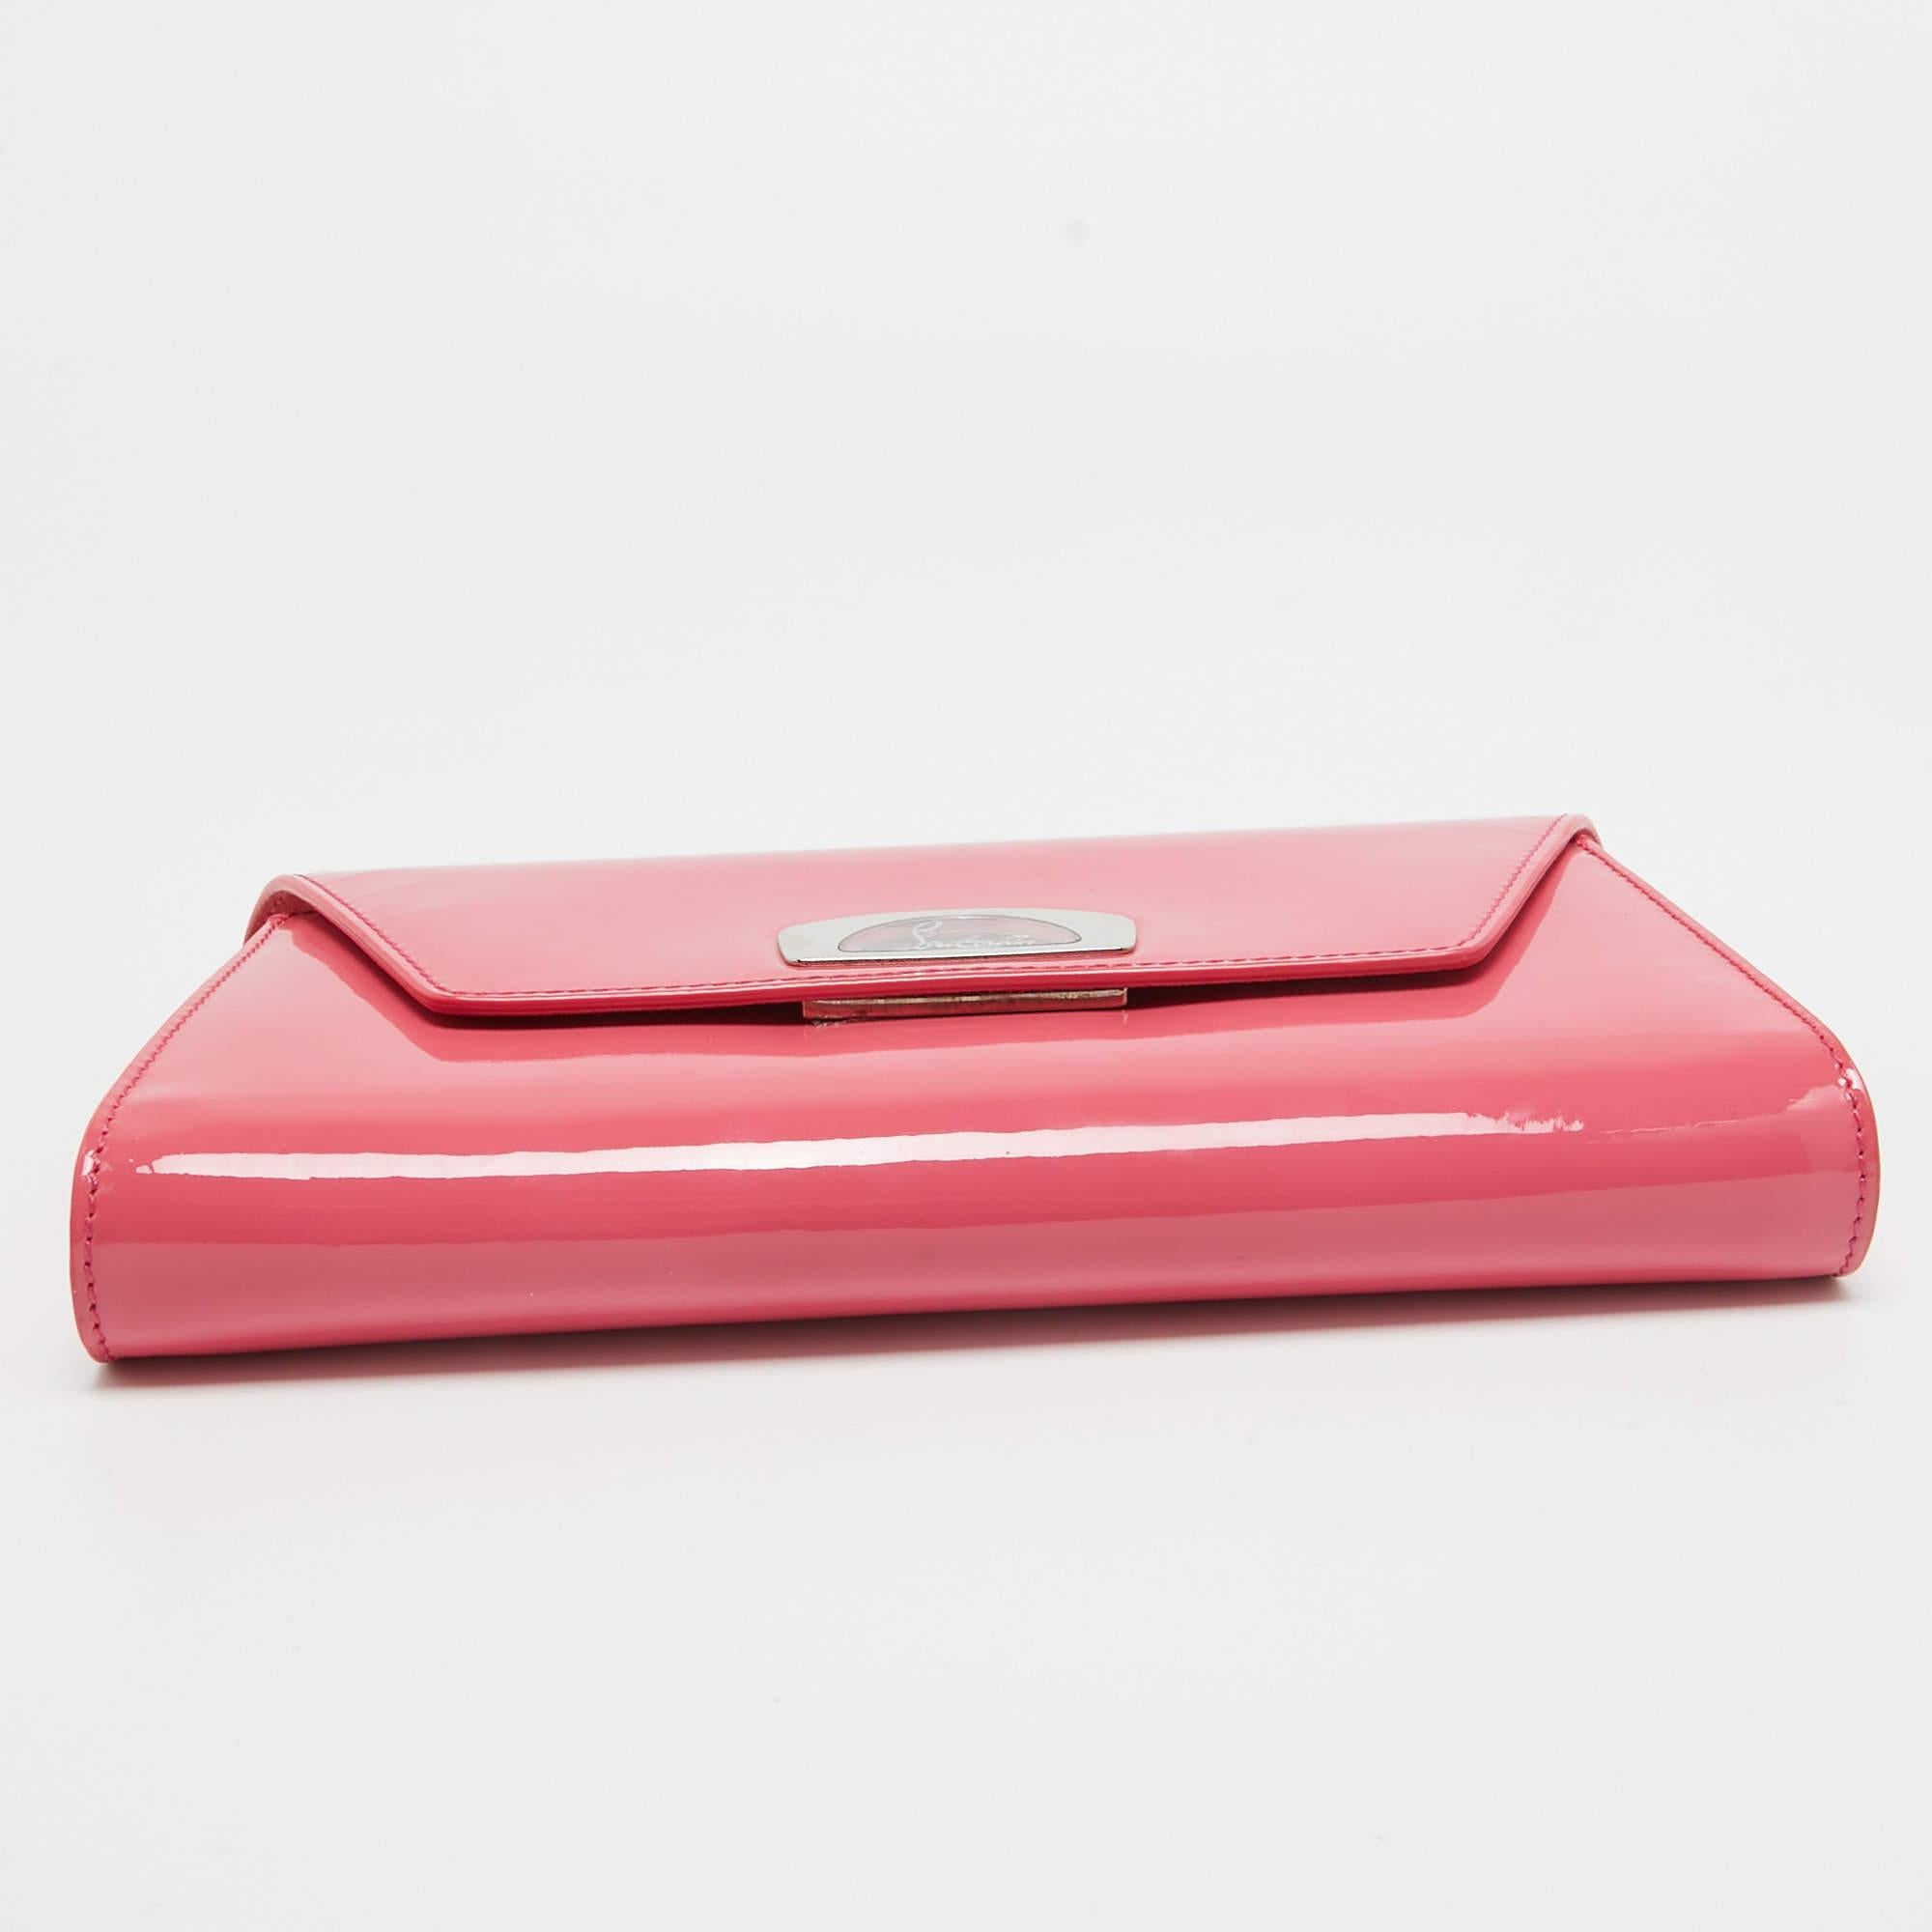 Christian Louboutin Pink Patent Leather Vero Dodat Chain Clutch For Sale 7